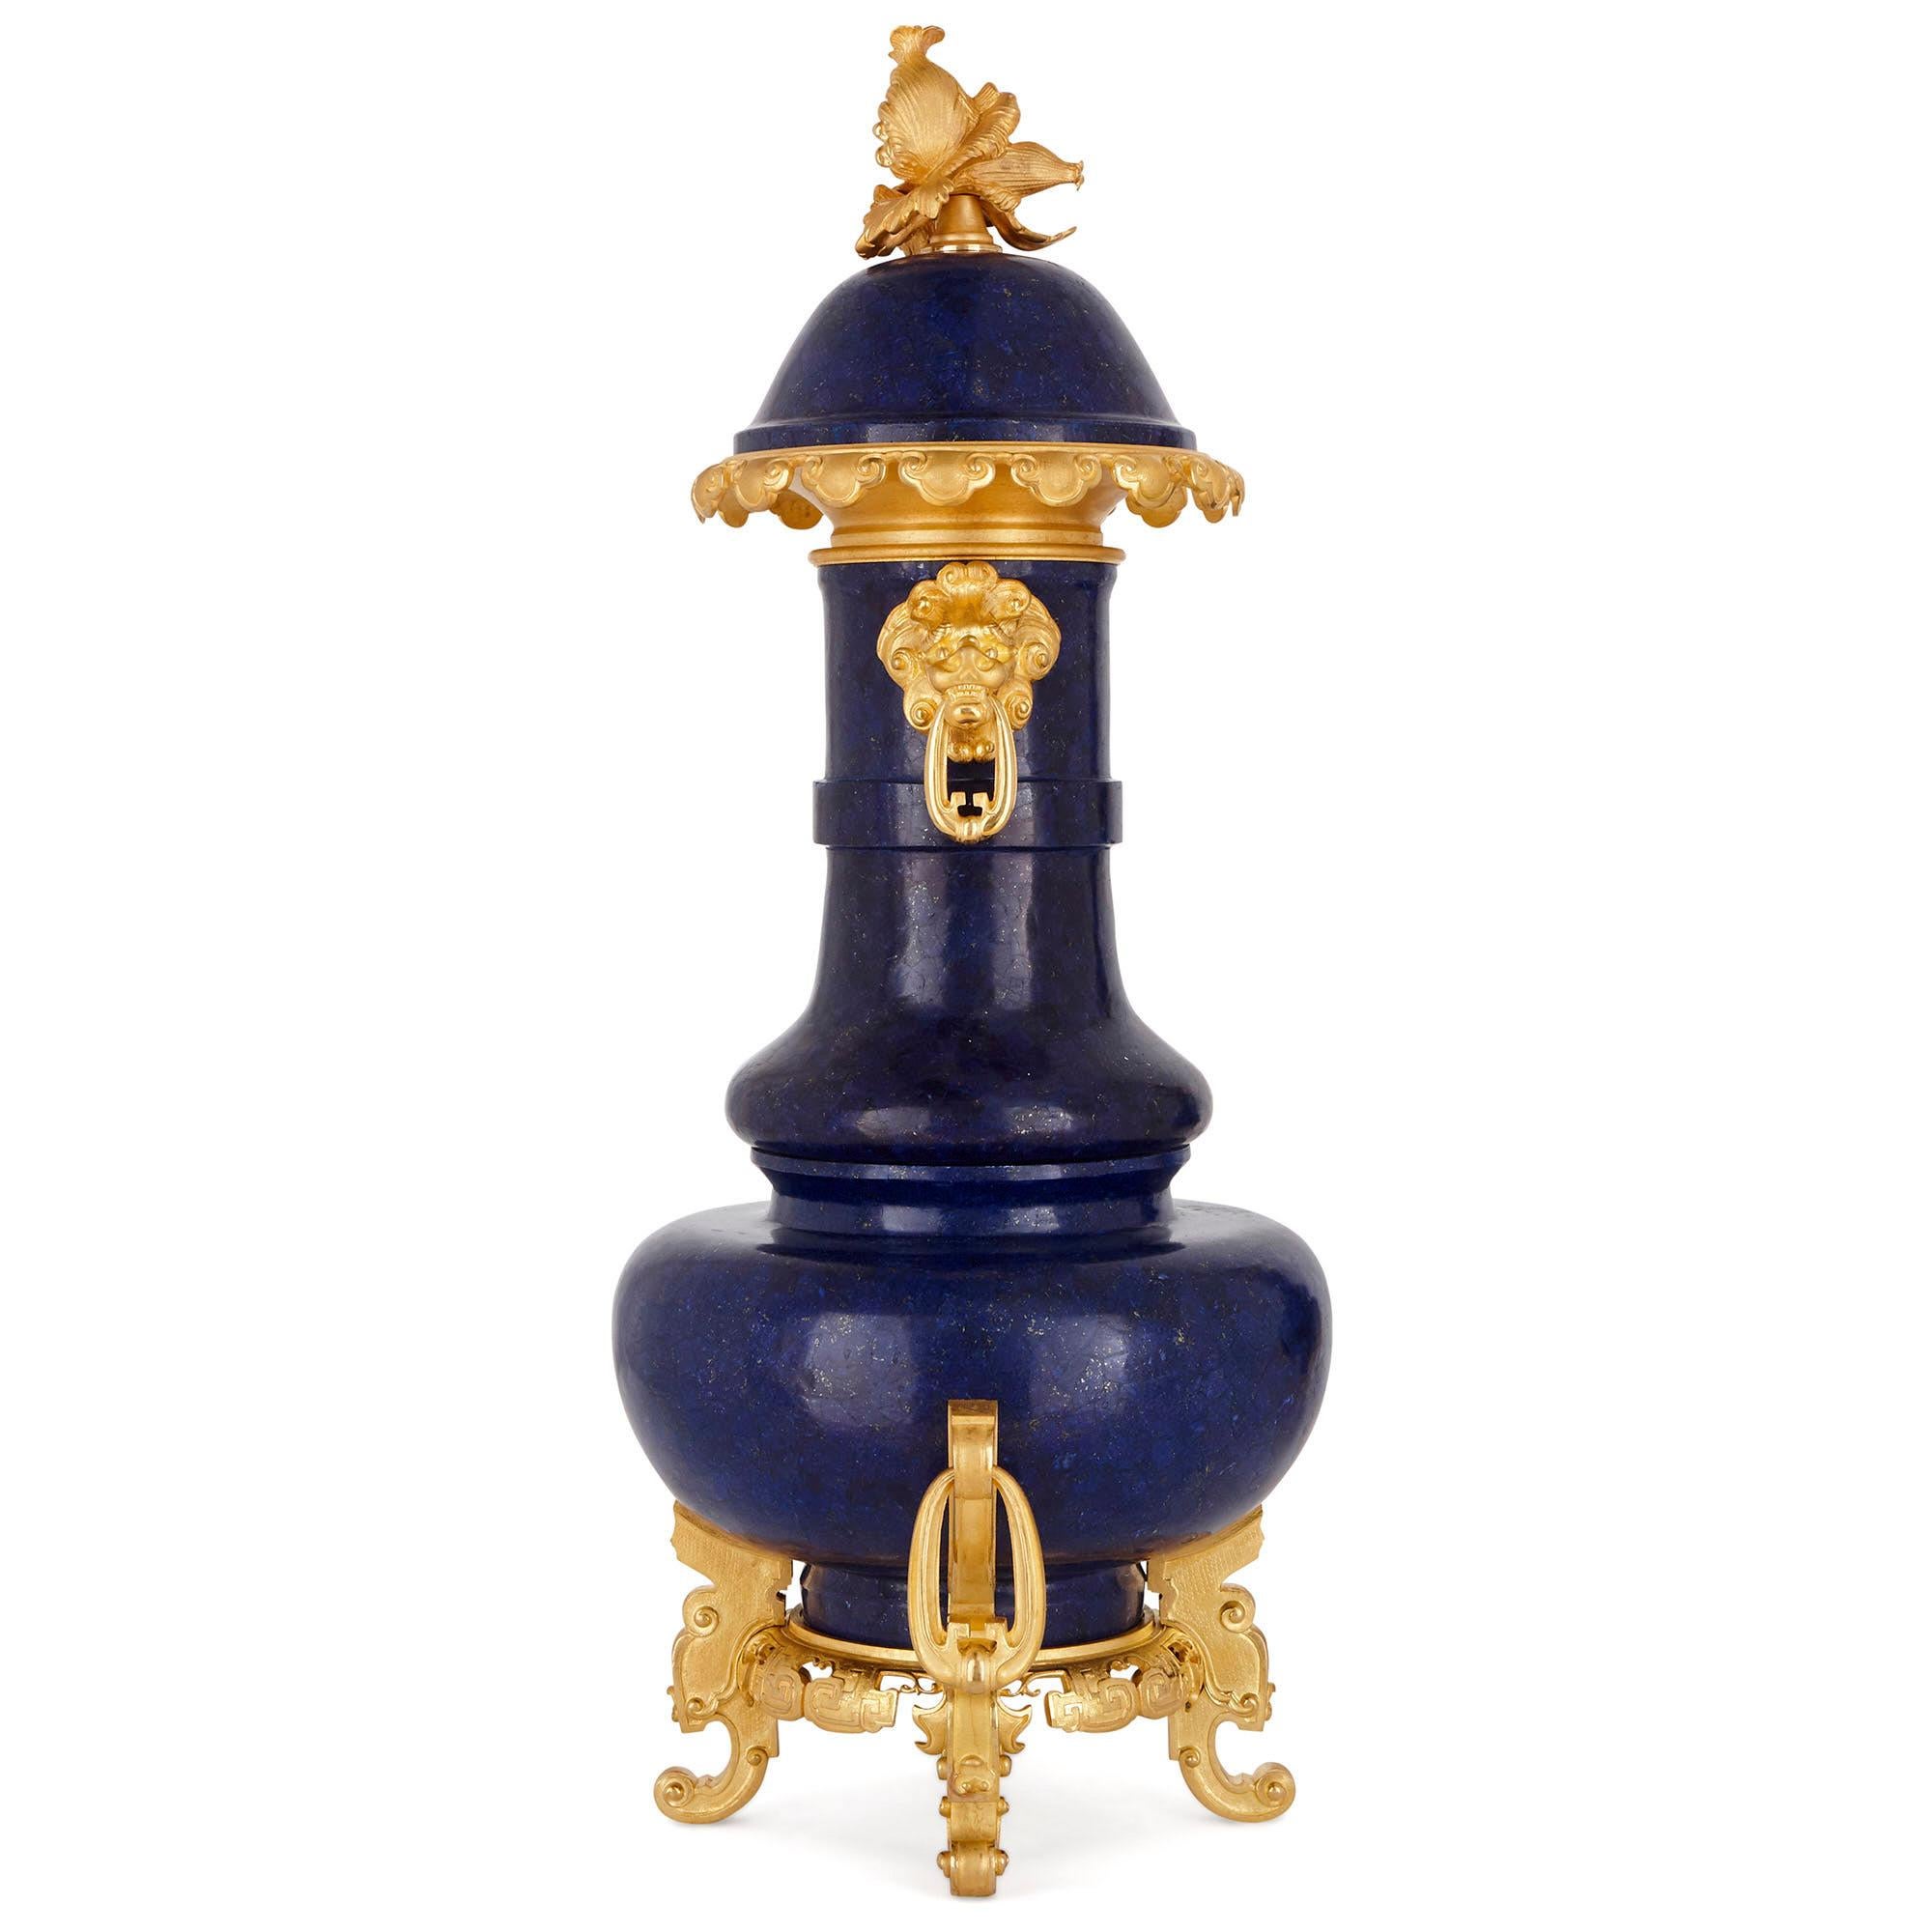 This urn (or vase) has been crafted from the finest materials: the deep blue gemstone, lapis lazuli, and lustrous gilt bronze (ormolu). The urn is designed in a style known as ‘chinoiserie’, a French style that is inspired by Chinese decorative